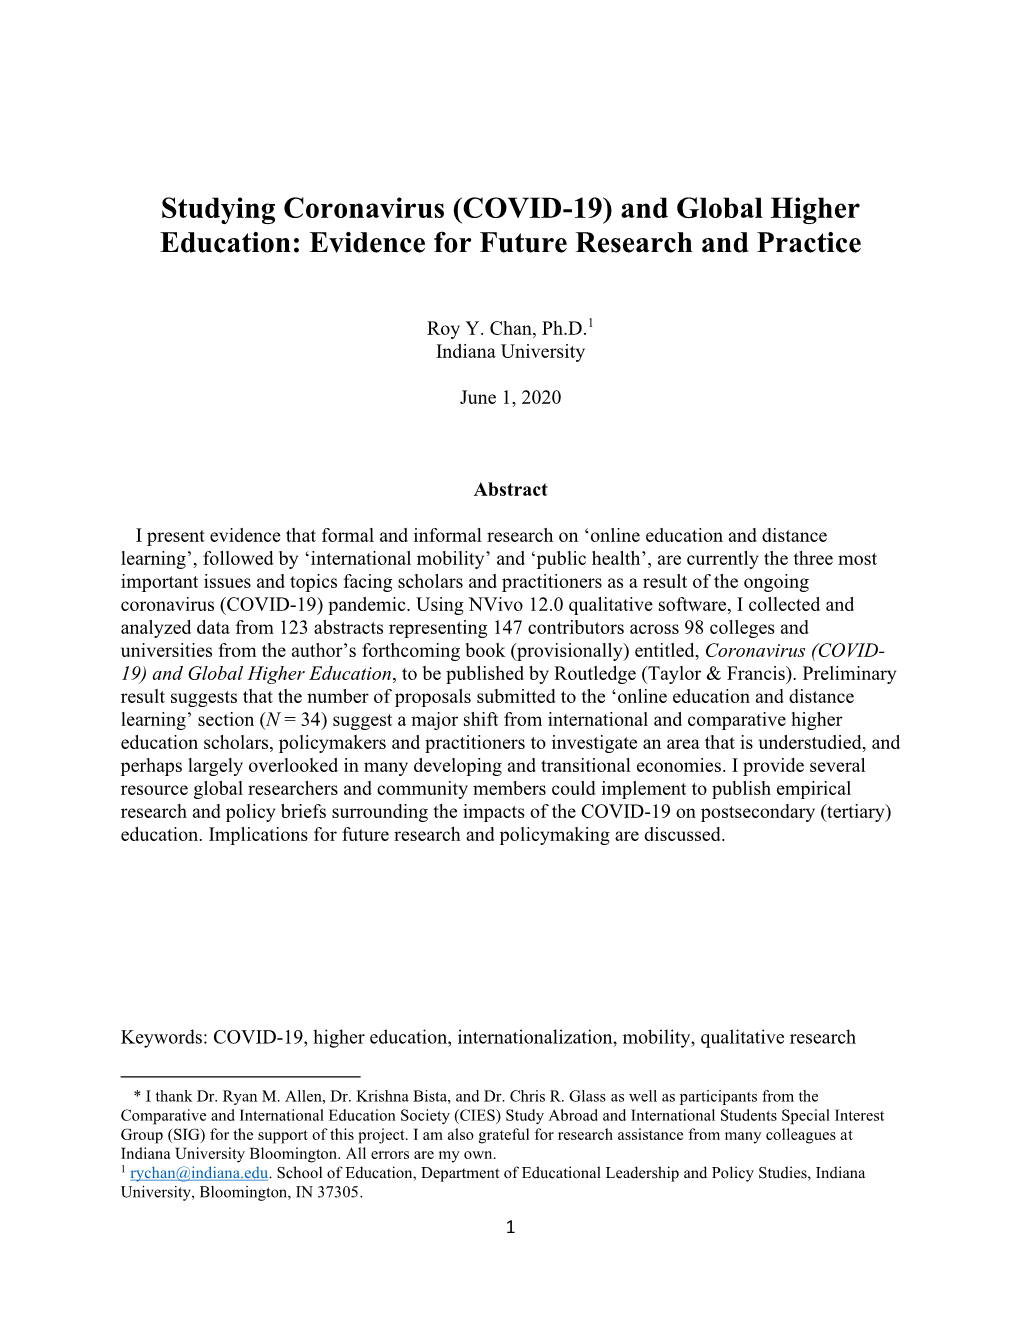 Studying Coronavirus (COVID-19) and Global Higher Education: Evidence for Future Research and Practice